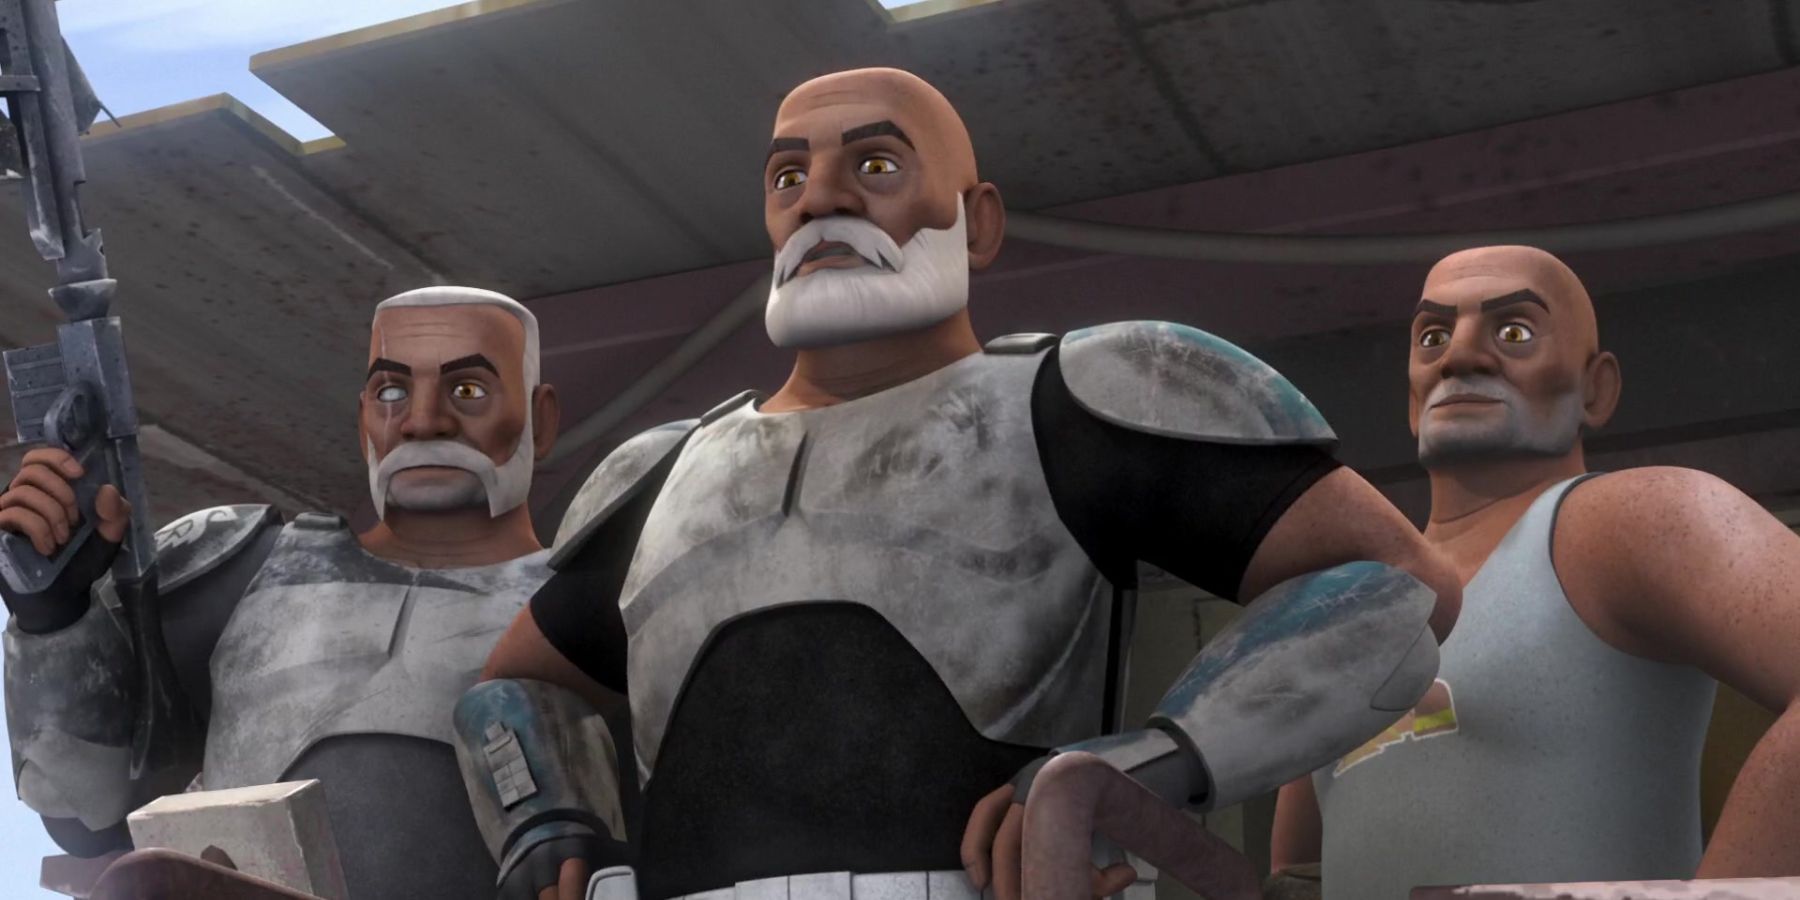 rex, gregor, and wolffe meet the ghost crew